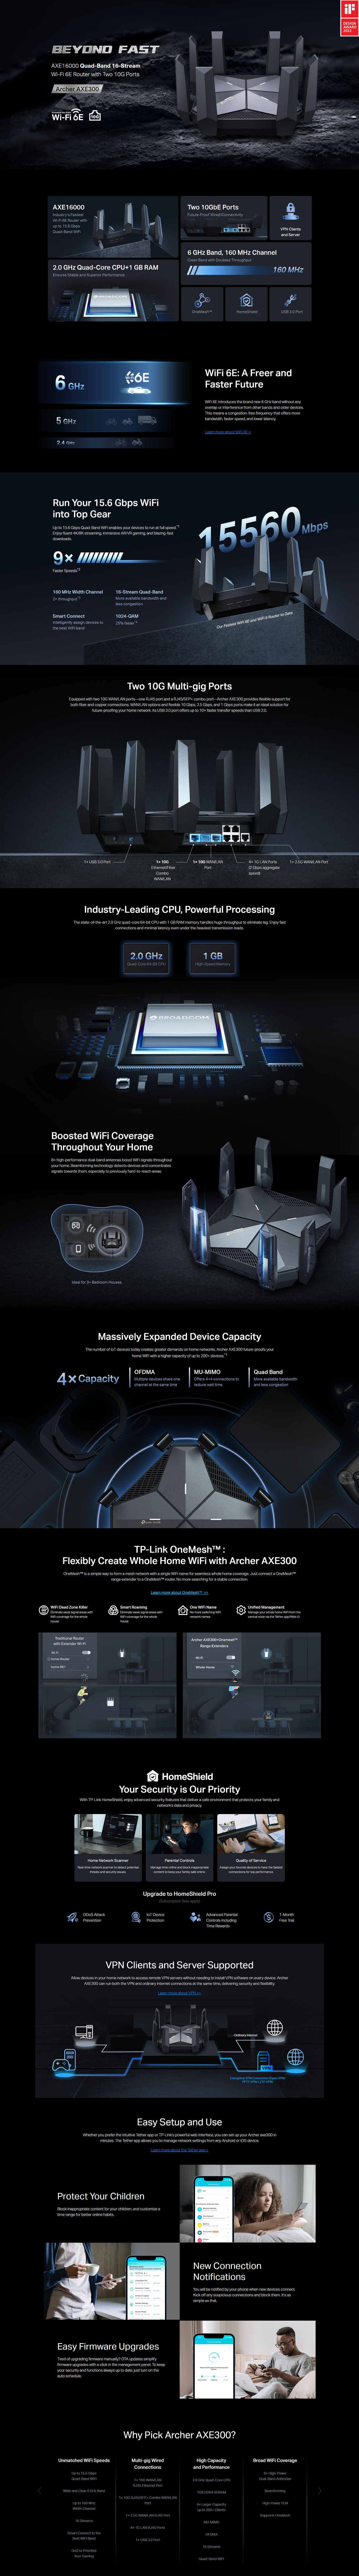 A large marketing image providing additional information about the product TP-Link Archer AXE300 - AXE16000 Quad-Band Wi-Fi 6E Router - Additional alt info not provided